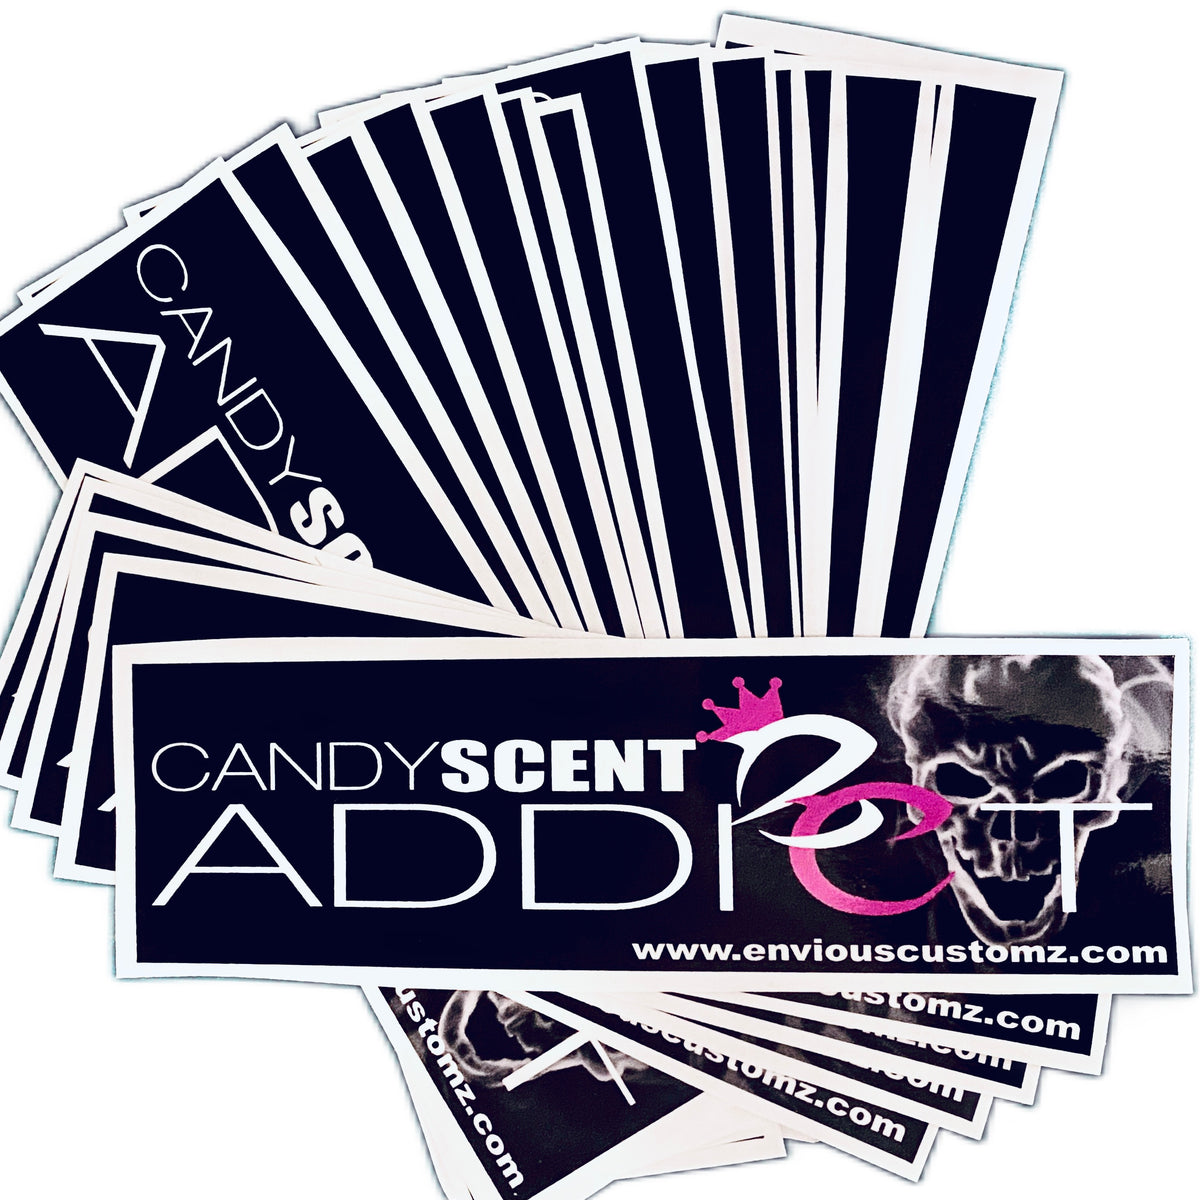 EC Candy Addicted Sticker - CANDY SCENT - ENVIOUS CUSTOMZ 